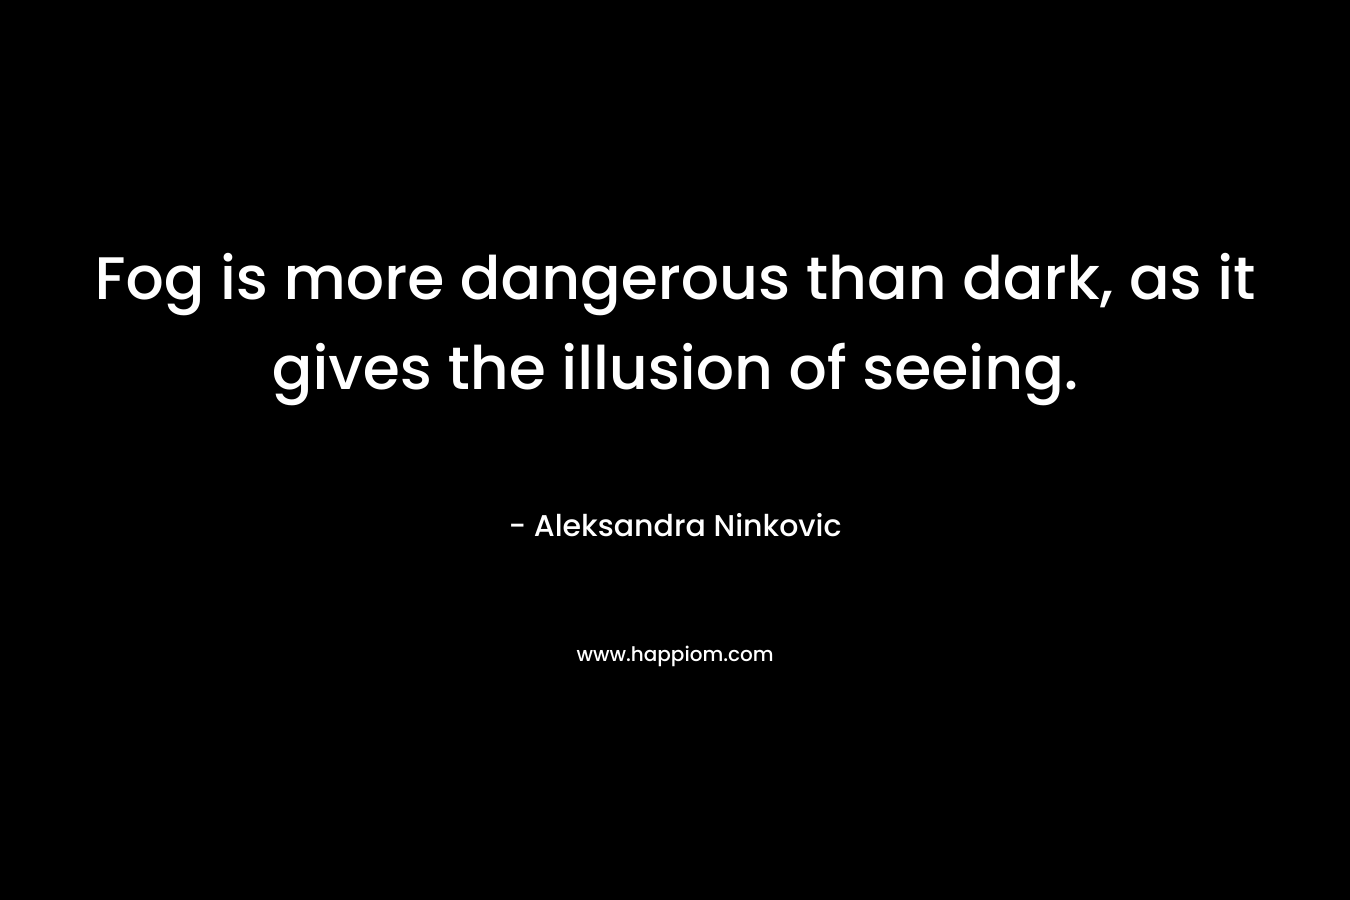 Fog is more dangerous than dark, as it gives the illusion of seeing. – Aleksandra Ninkovic